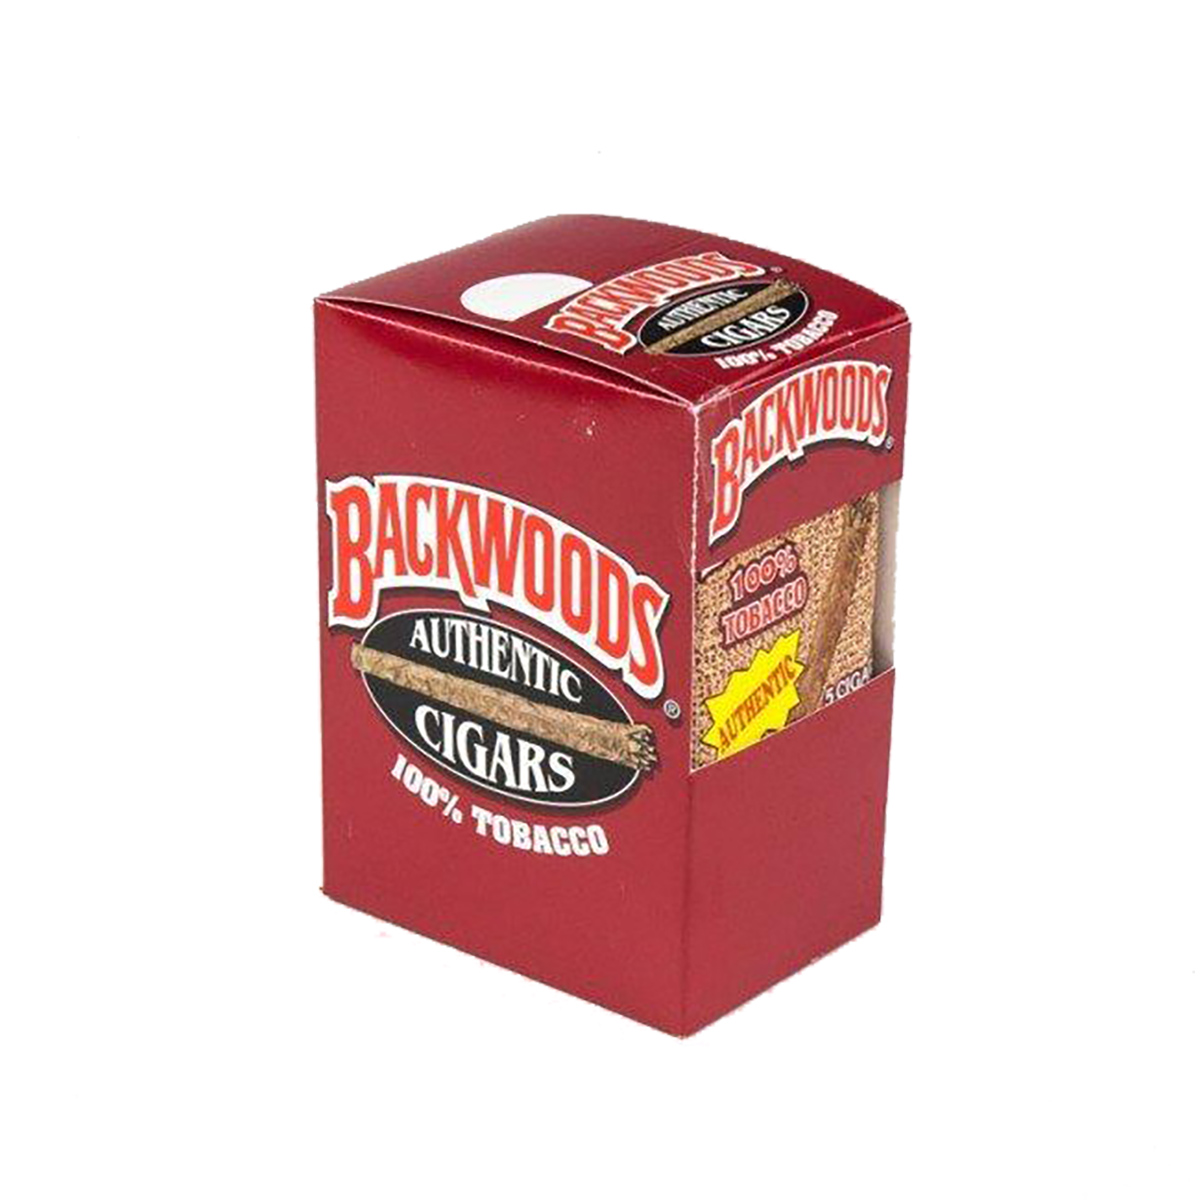 Backwoods - Authentic (8 x Pack of 5)